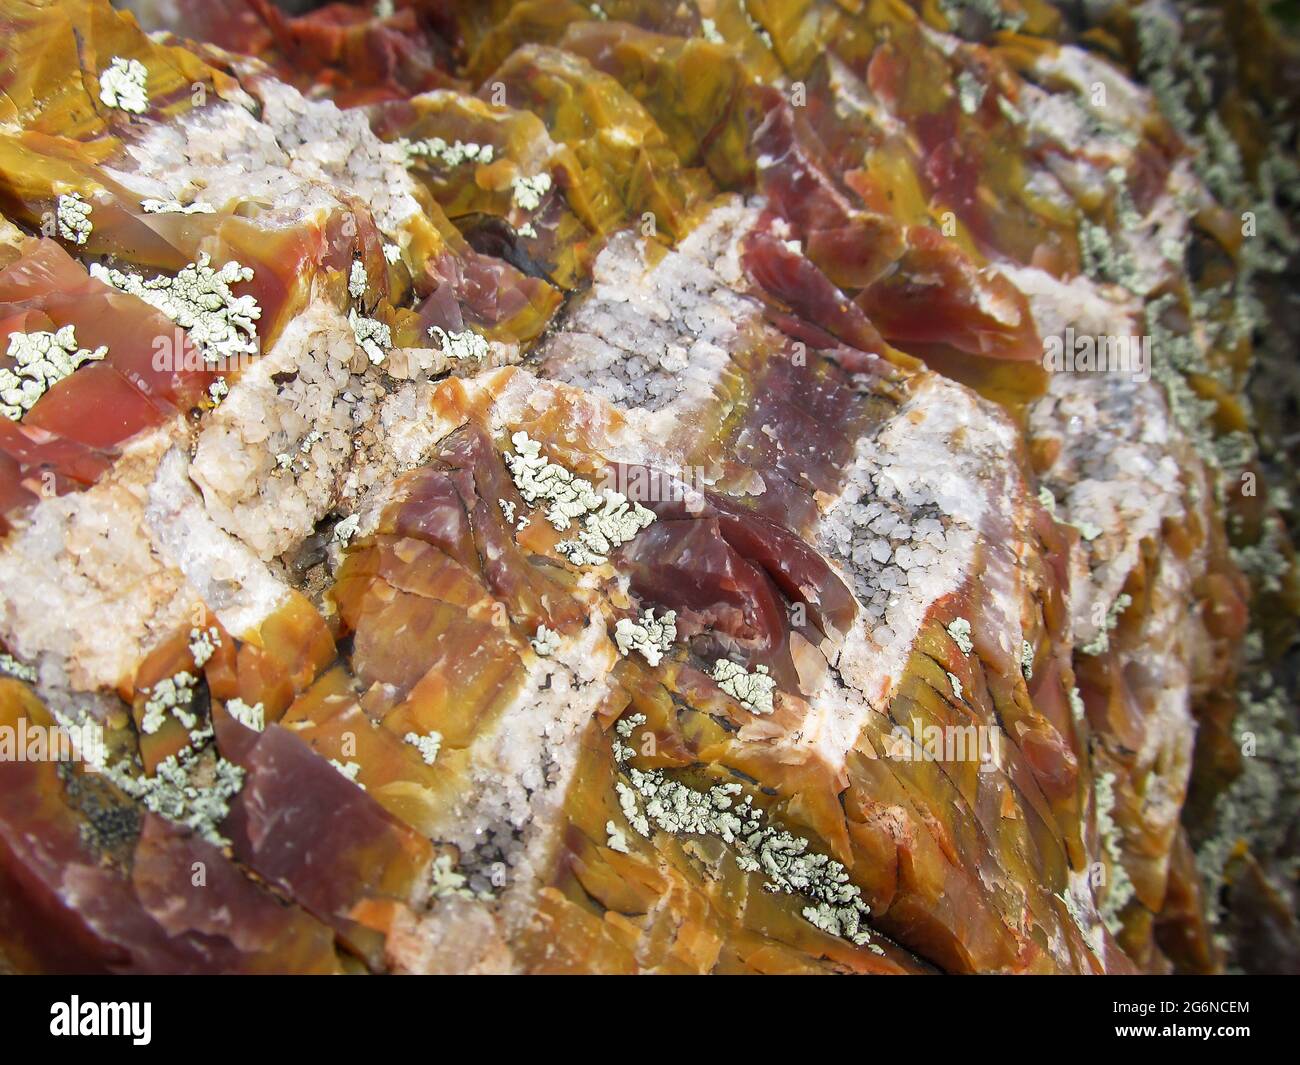 Quartz crystals which grew in the cracks of a piece of colorful fossilized wood of the Petrified Forest state park, Escalante, Utah, USA Stock Photo